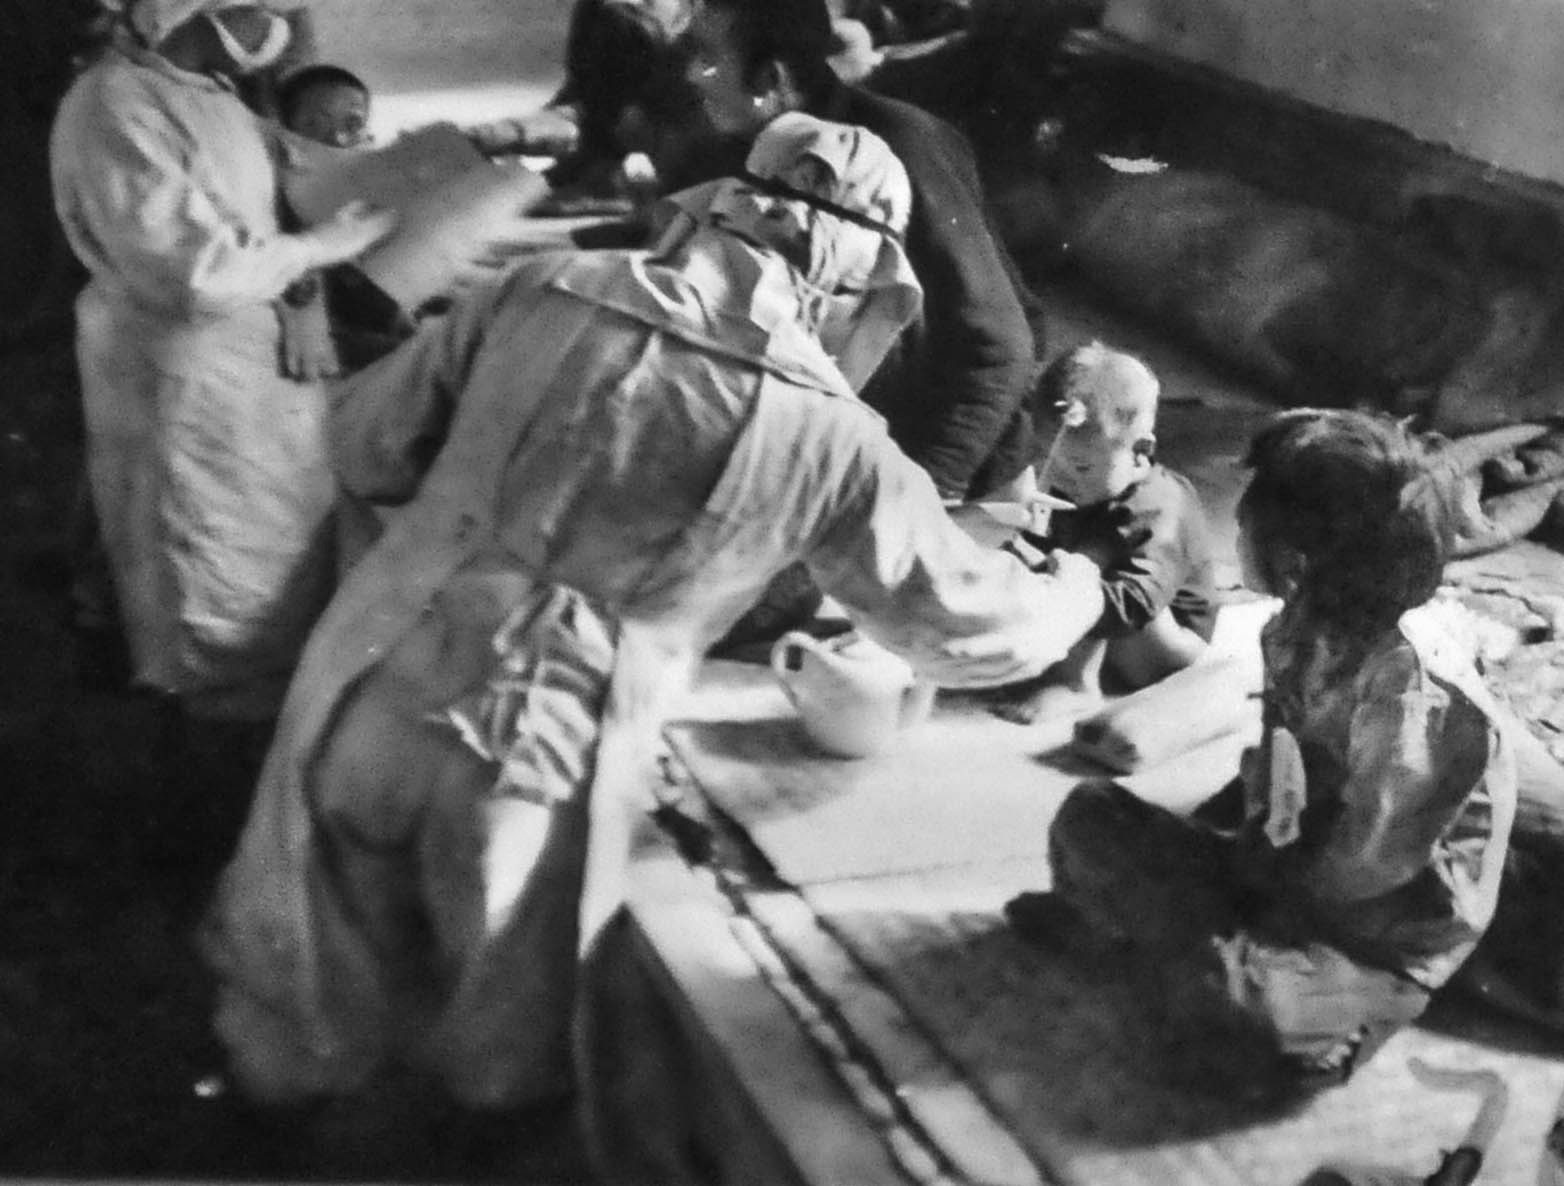 Chinese children are being subjected to trials intended to limit the spread of the plague. Many of the terrible experiments conducted by Unit 731 involved the spread of infectious disease.